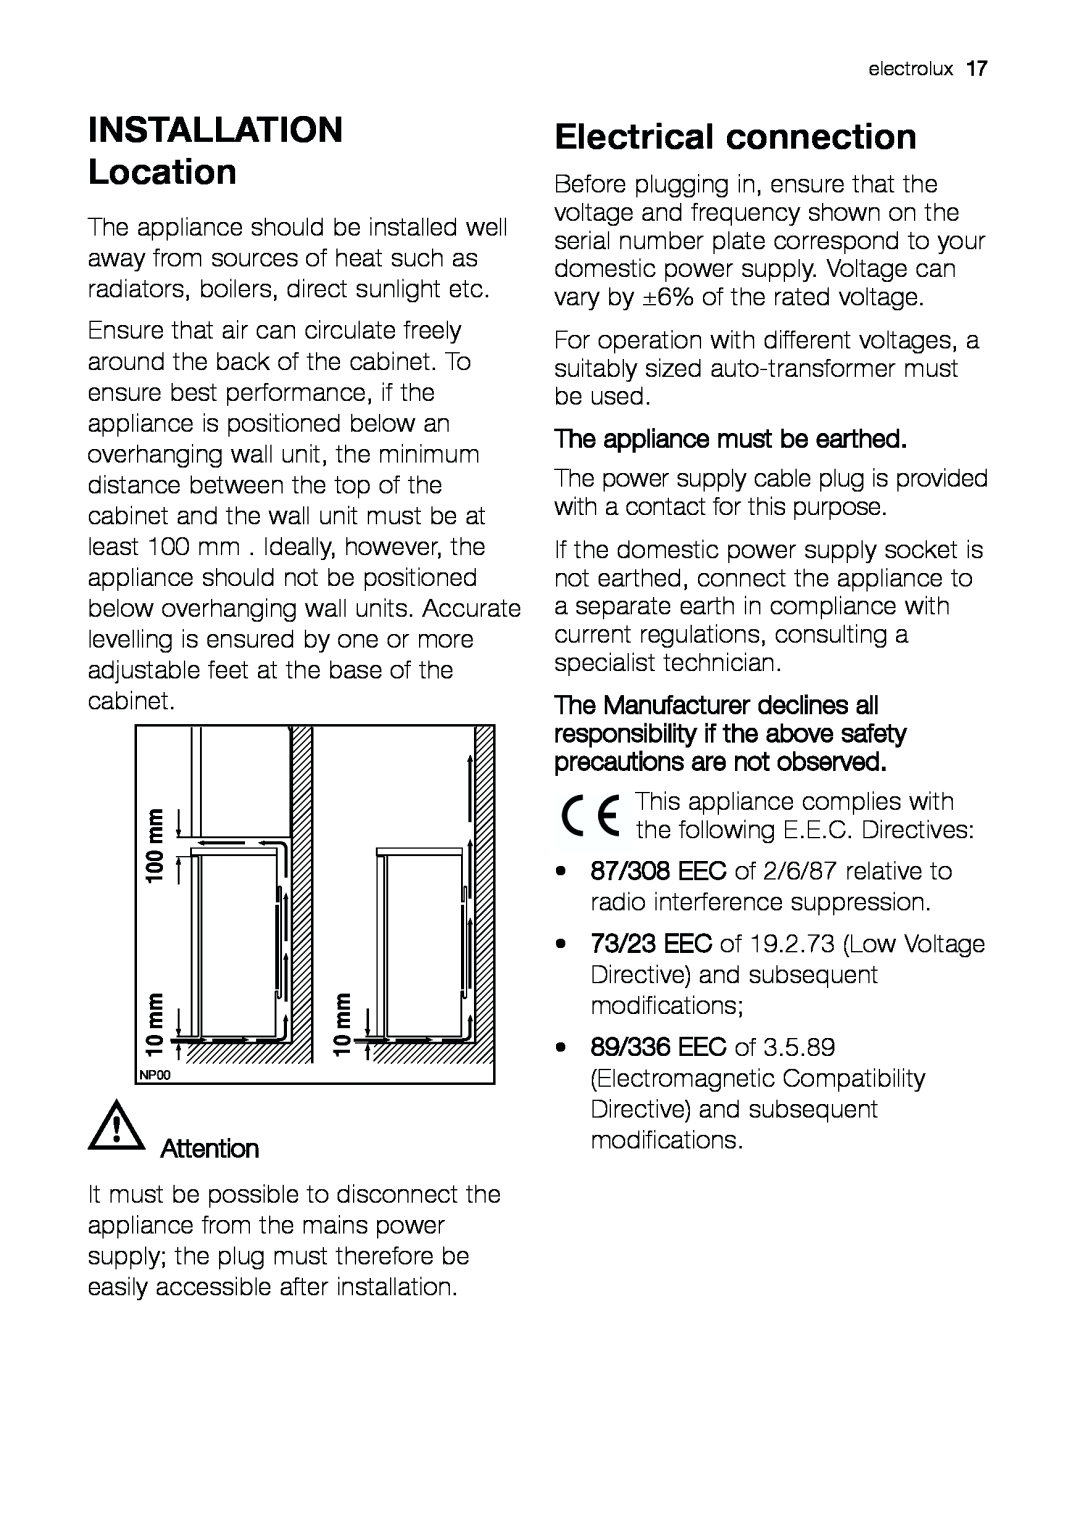 Electrolux EUF 27391 X manual INSTALLATION Location, Electrical connection, The appliance must be earthed 